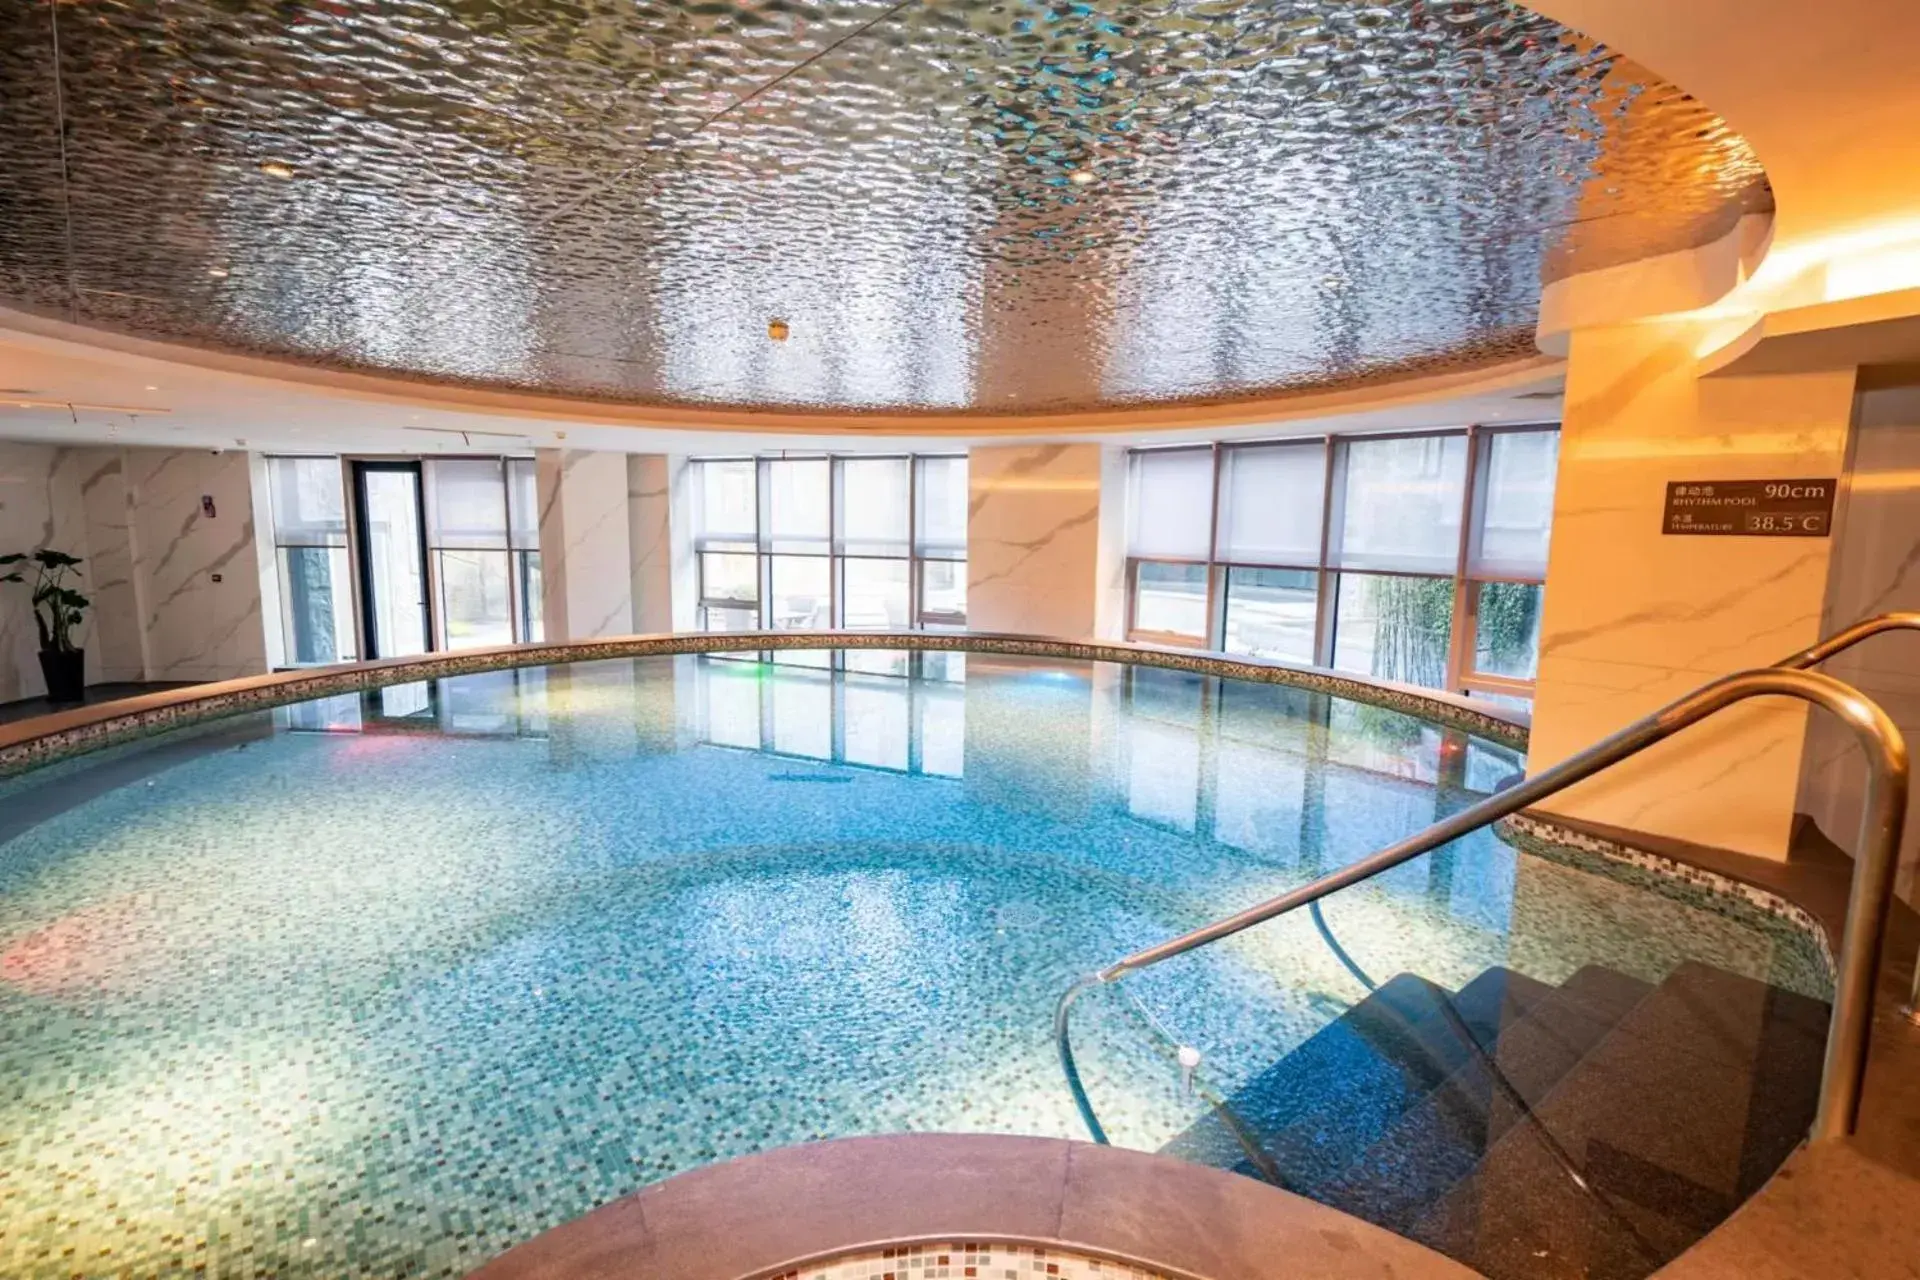 Swimming Pool in The Anandi Hotel and Spa Shanghai